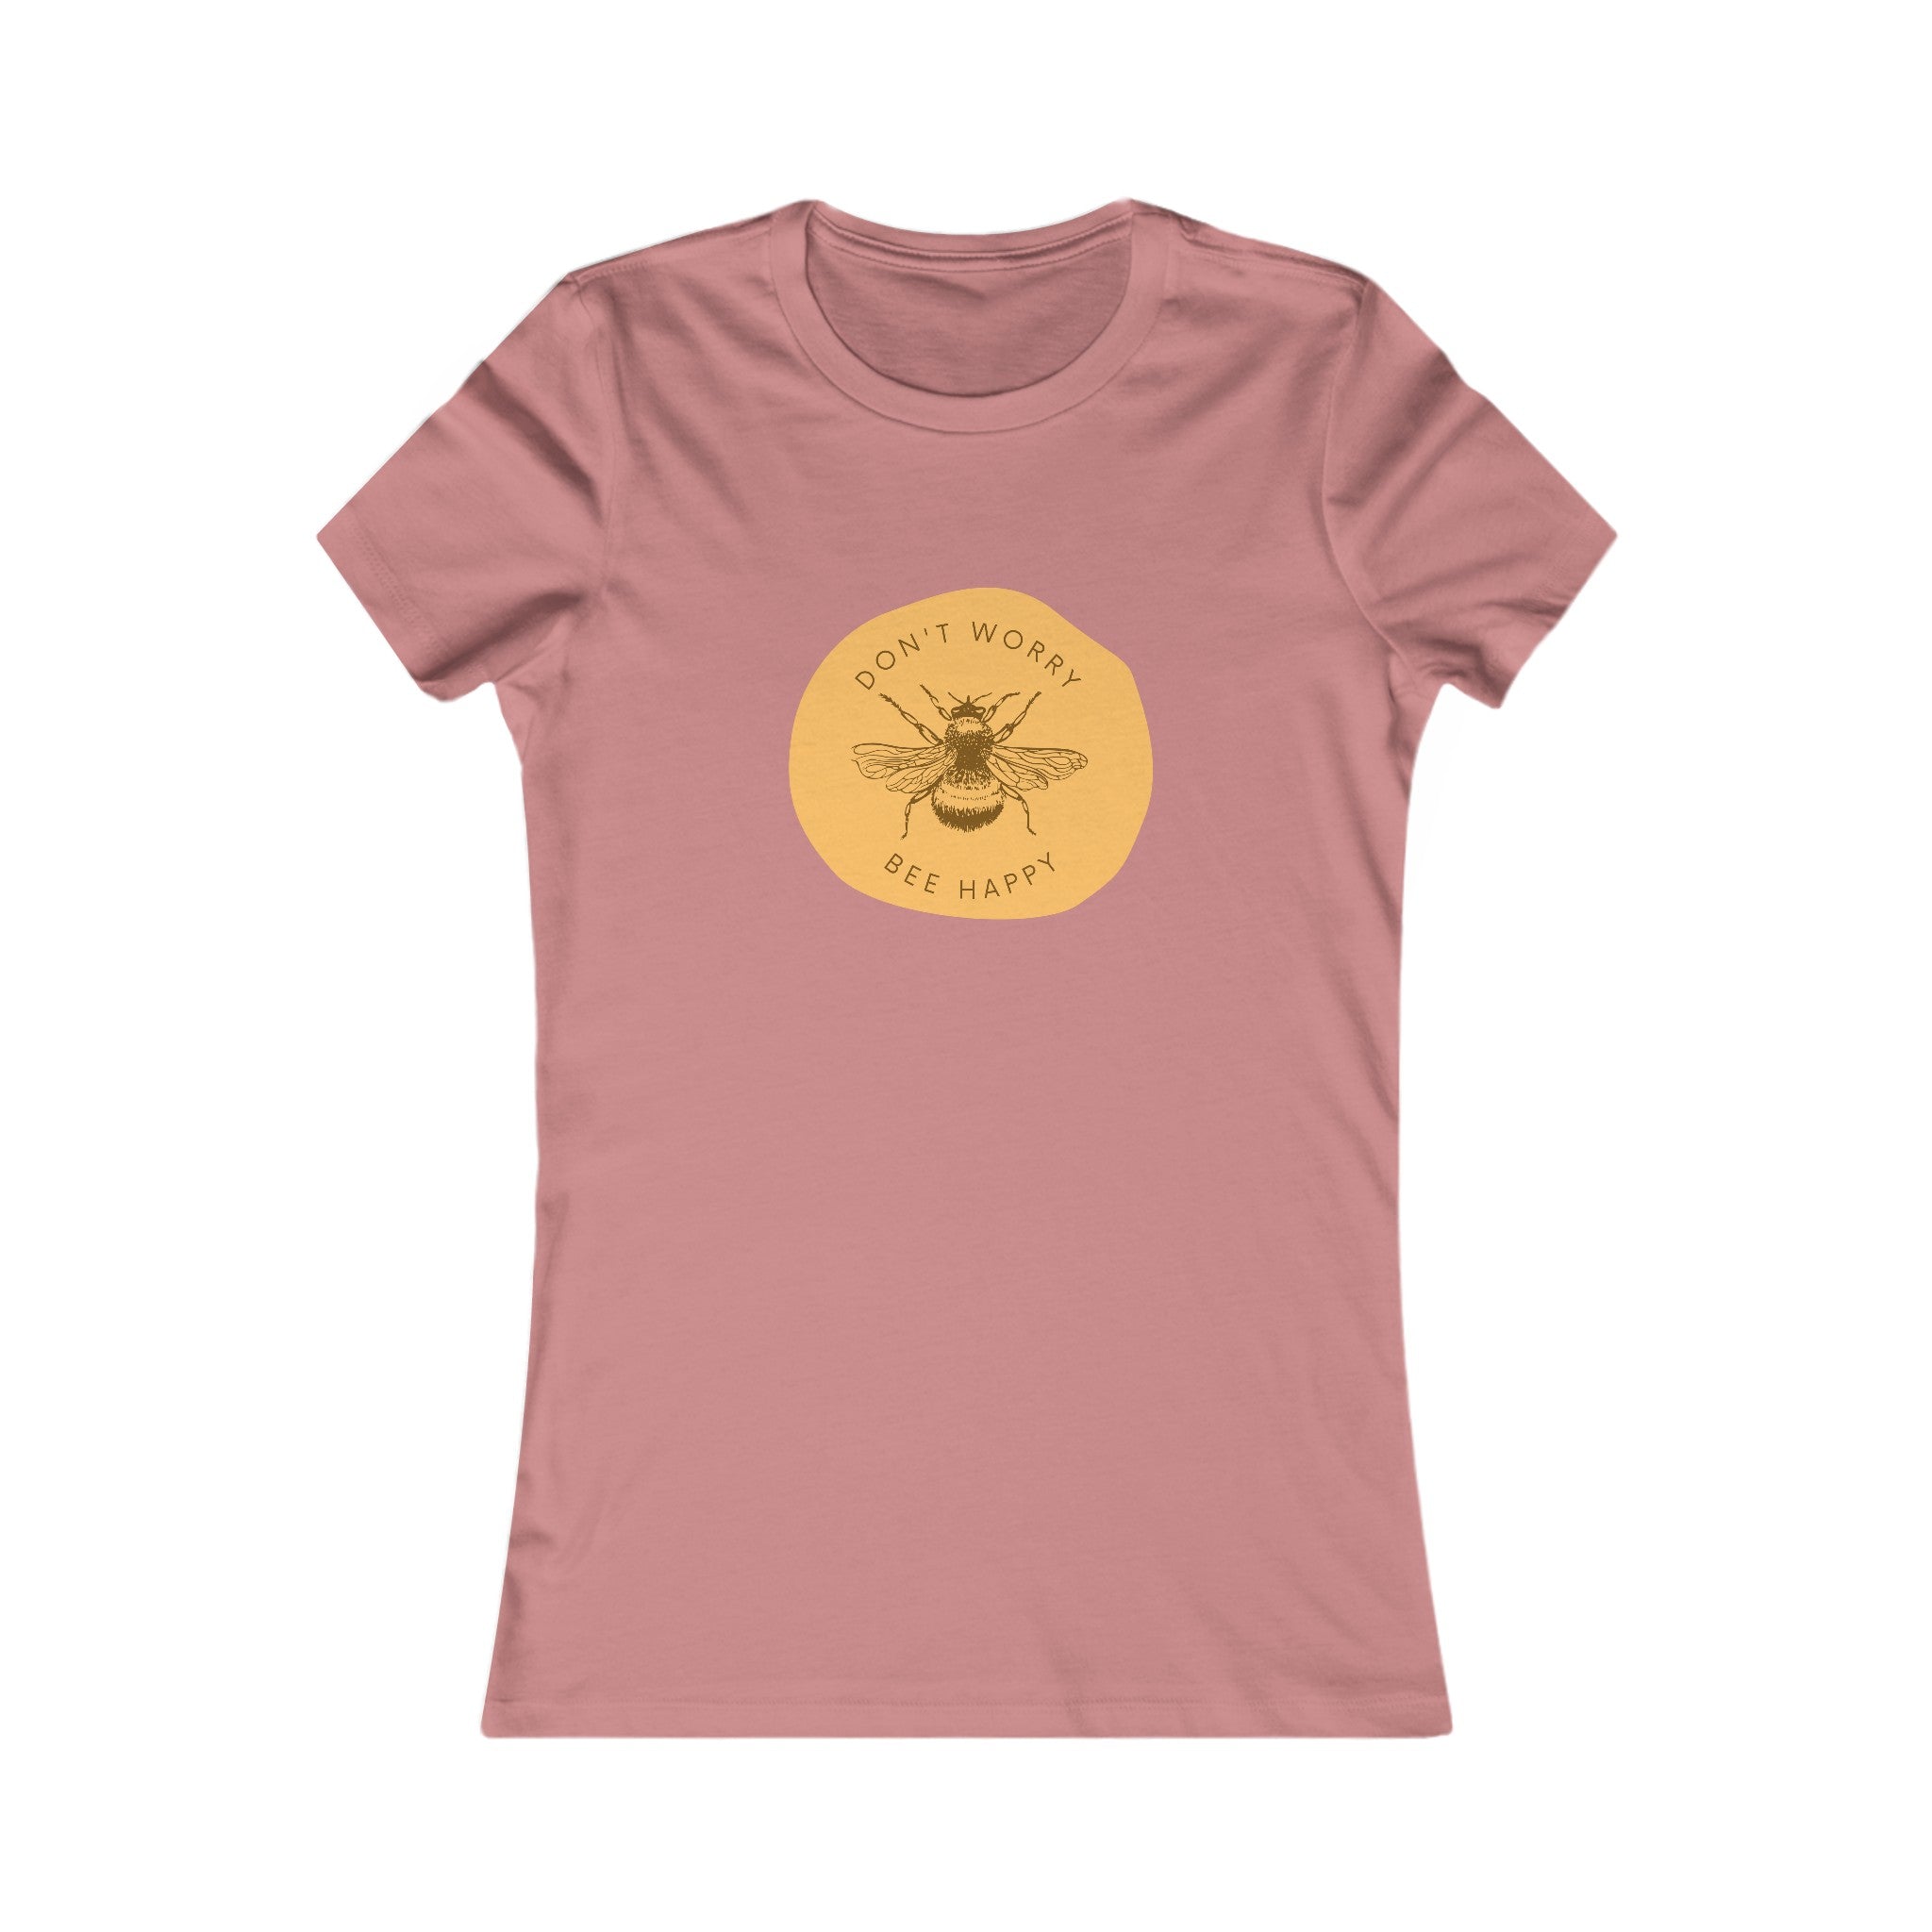 women's fitted t-shirt in mauve with an illustrative be saying 'Don't worry bee happy'